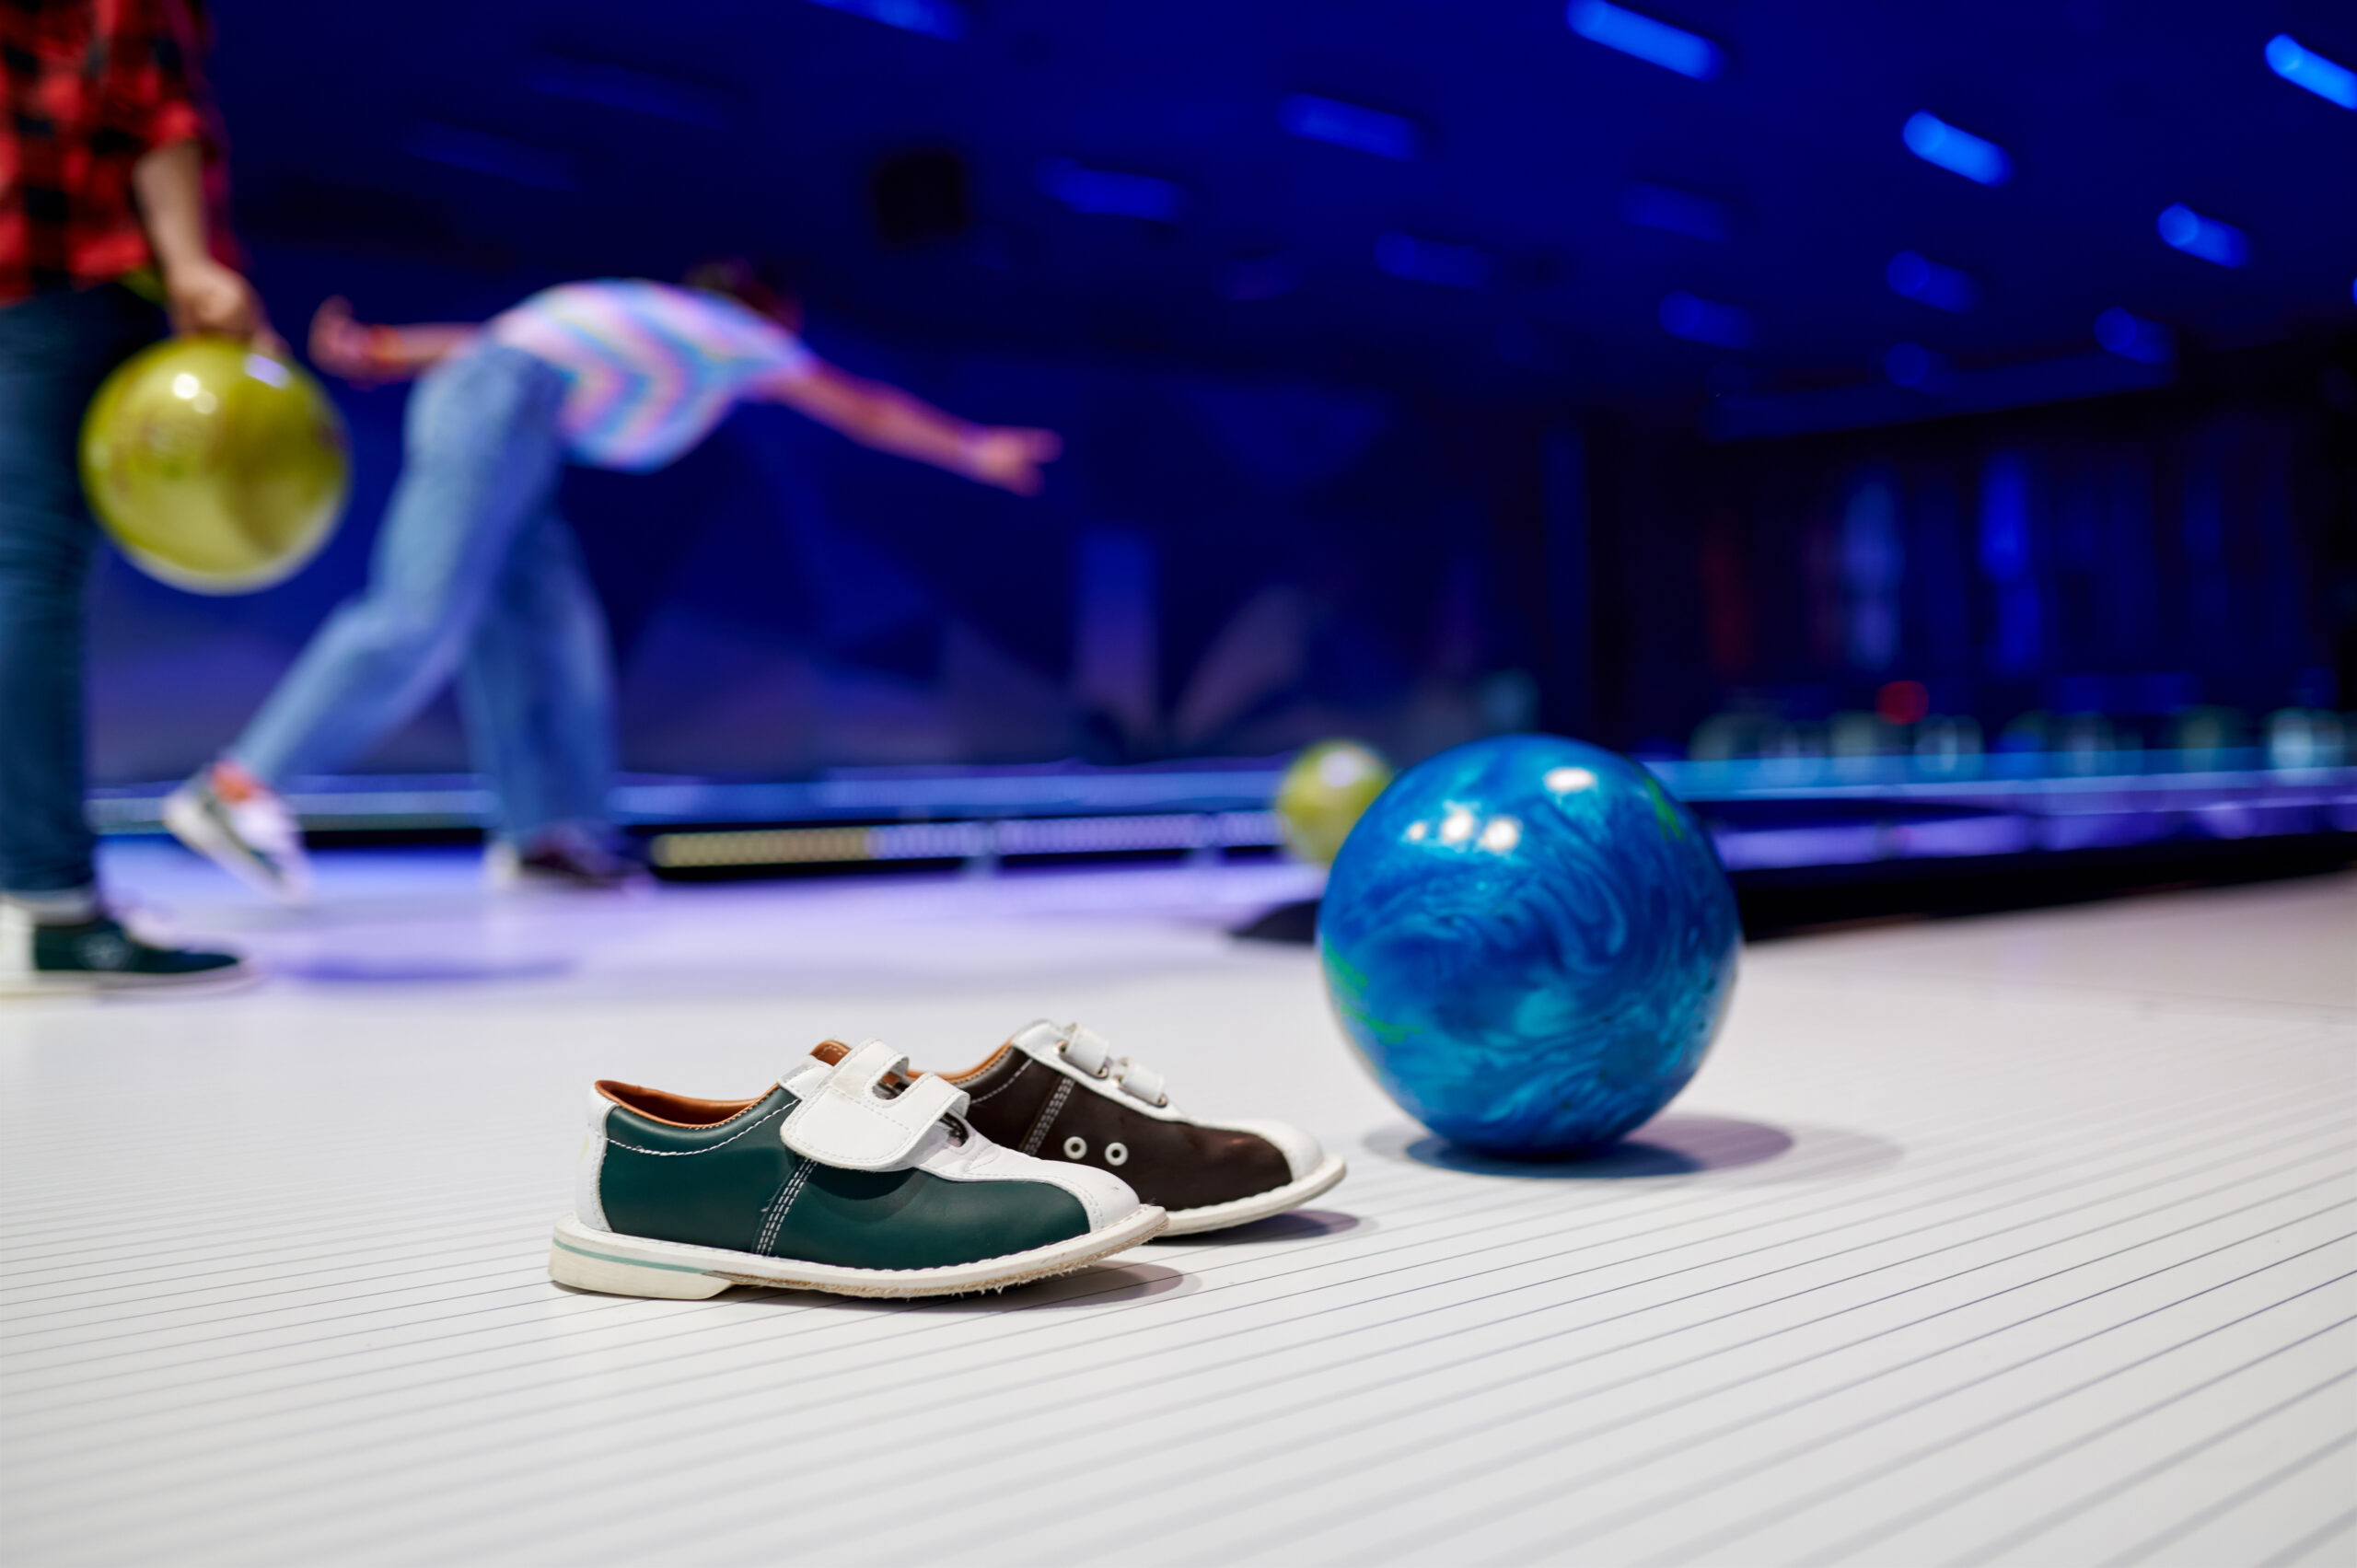 Ball and house shoes, children playing bowling, game concept. Kids are preparing to score a strike. Boys and girls having fun in entertainment center together